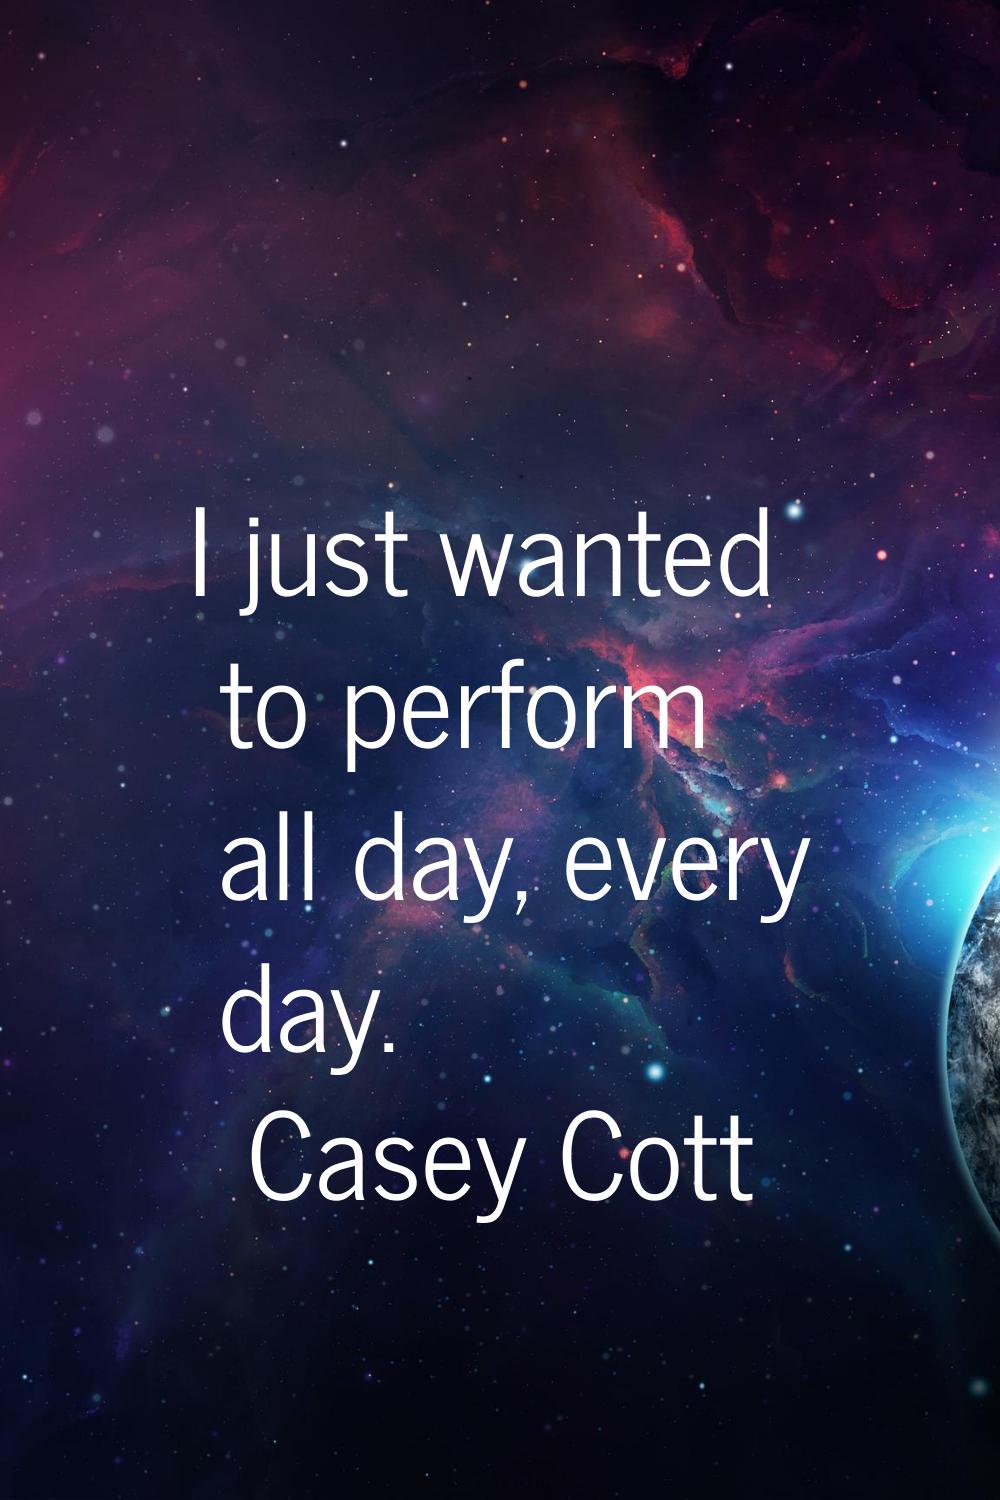 I just wanted to perform all day, every day.